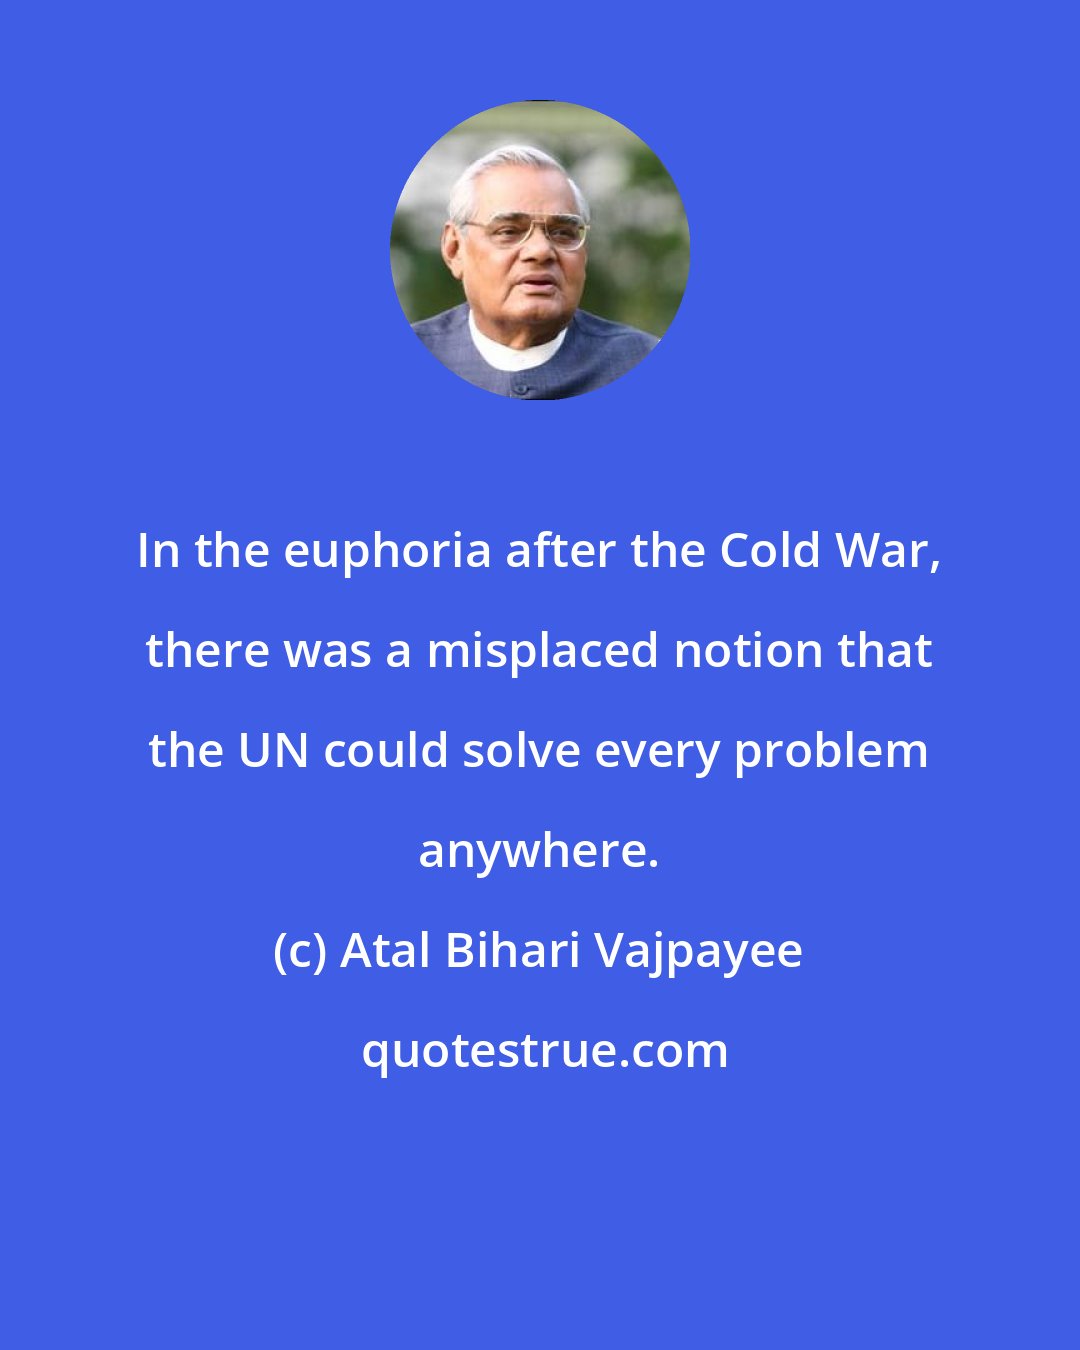 Atal Bihari Vajpayee: In the euphoria after the Cold War, there was a misplaced notion that the UN could solve every problem anywhere.